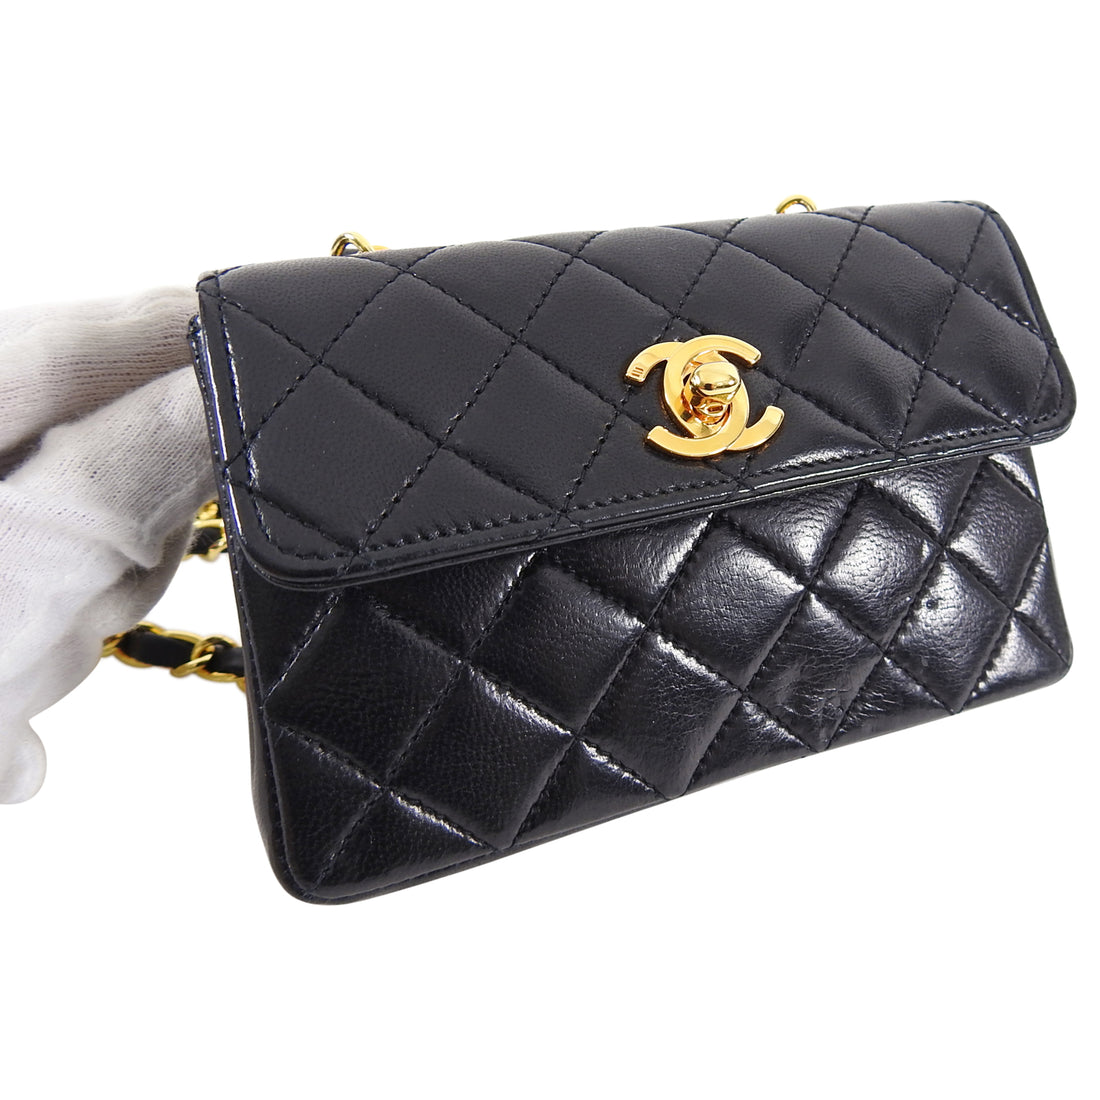 Chanel Vintage Black Quilted Lambskin Micro Half Flap Bag Gold